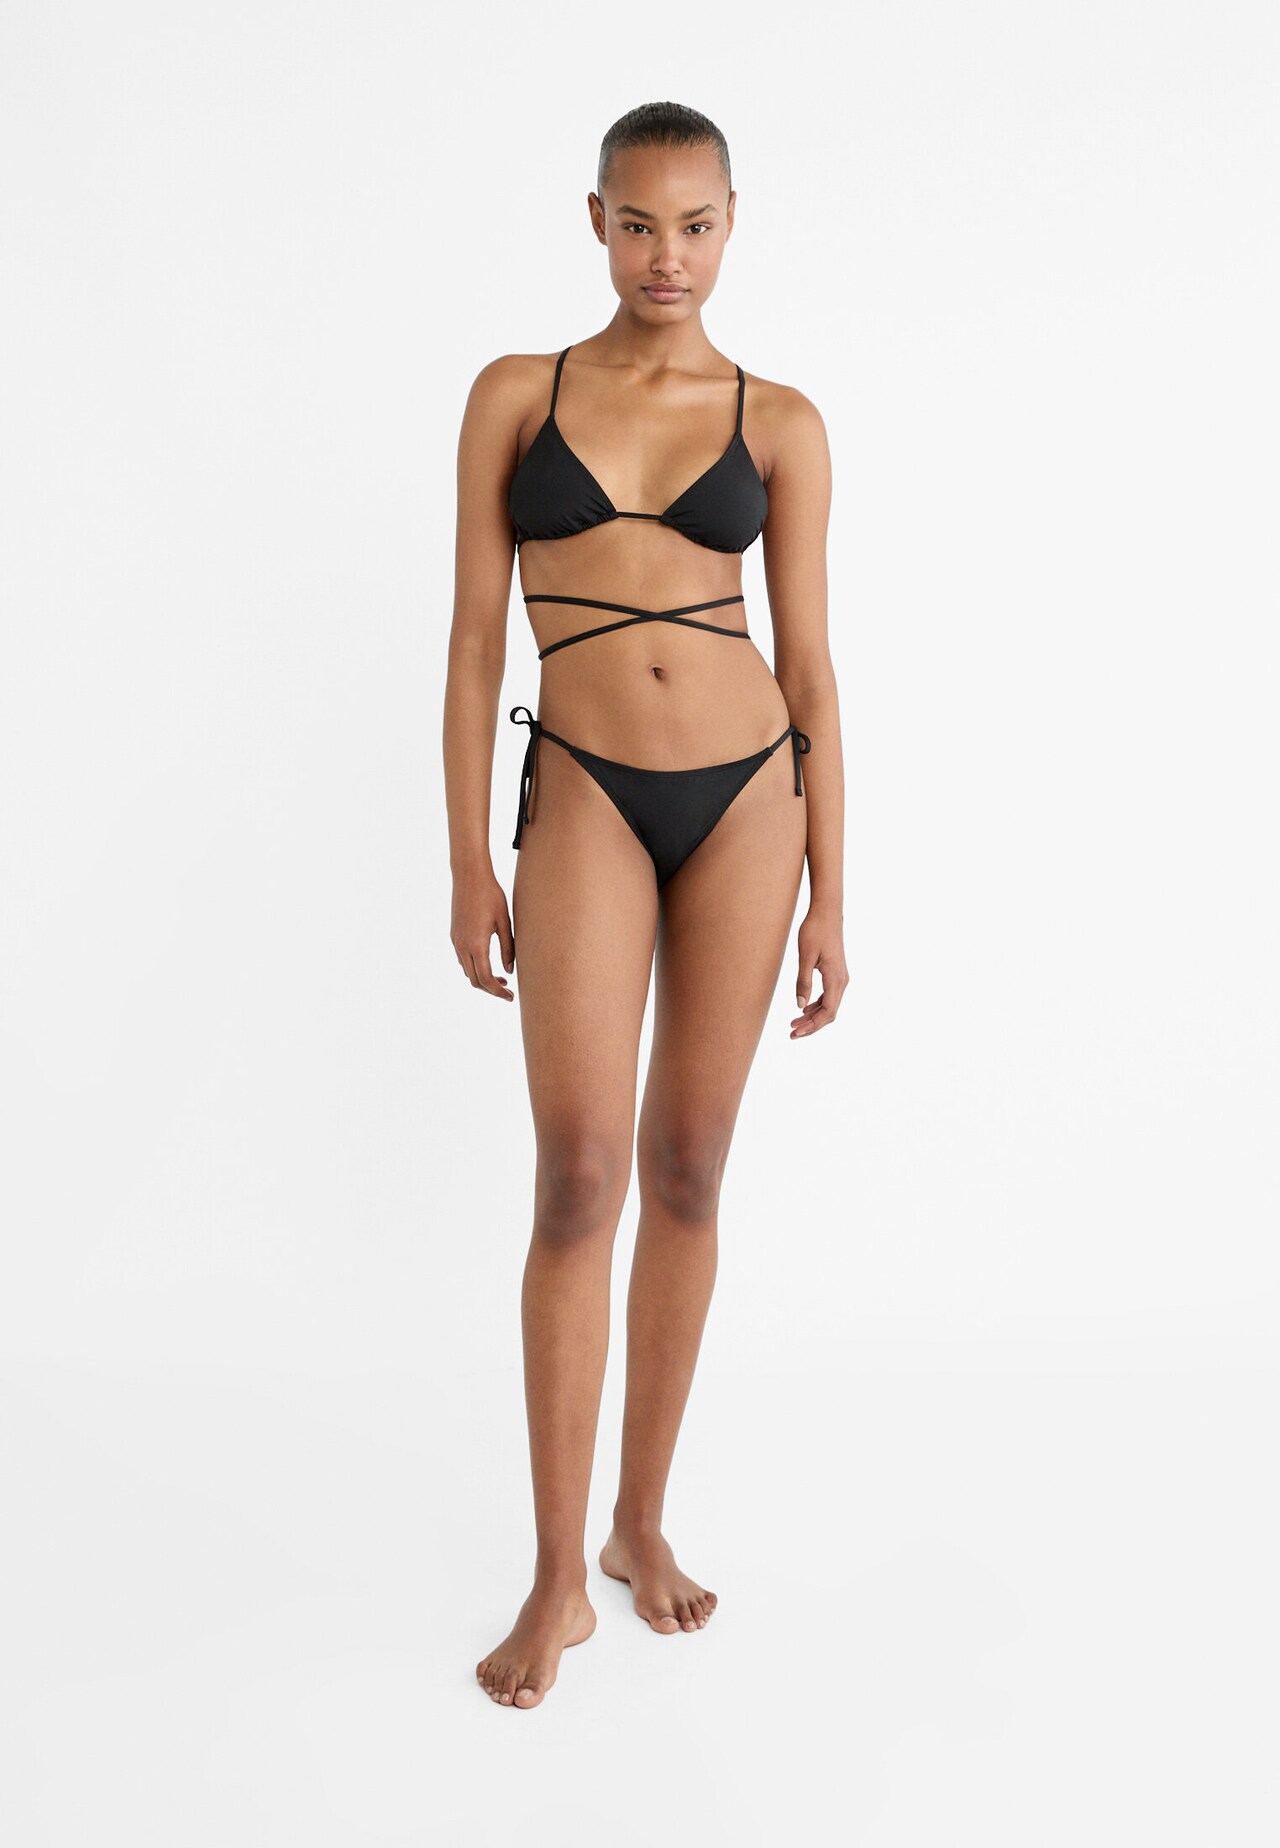 Bikini top with crossover straps at the back - Women's fashion